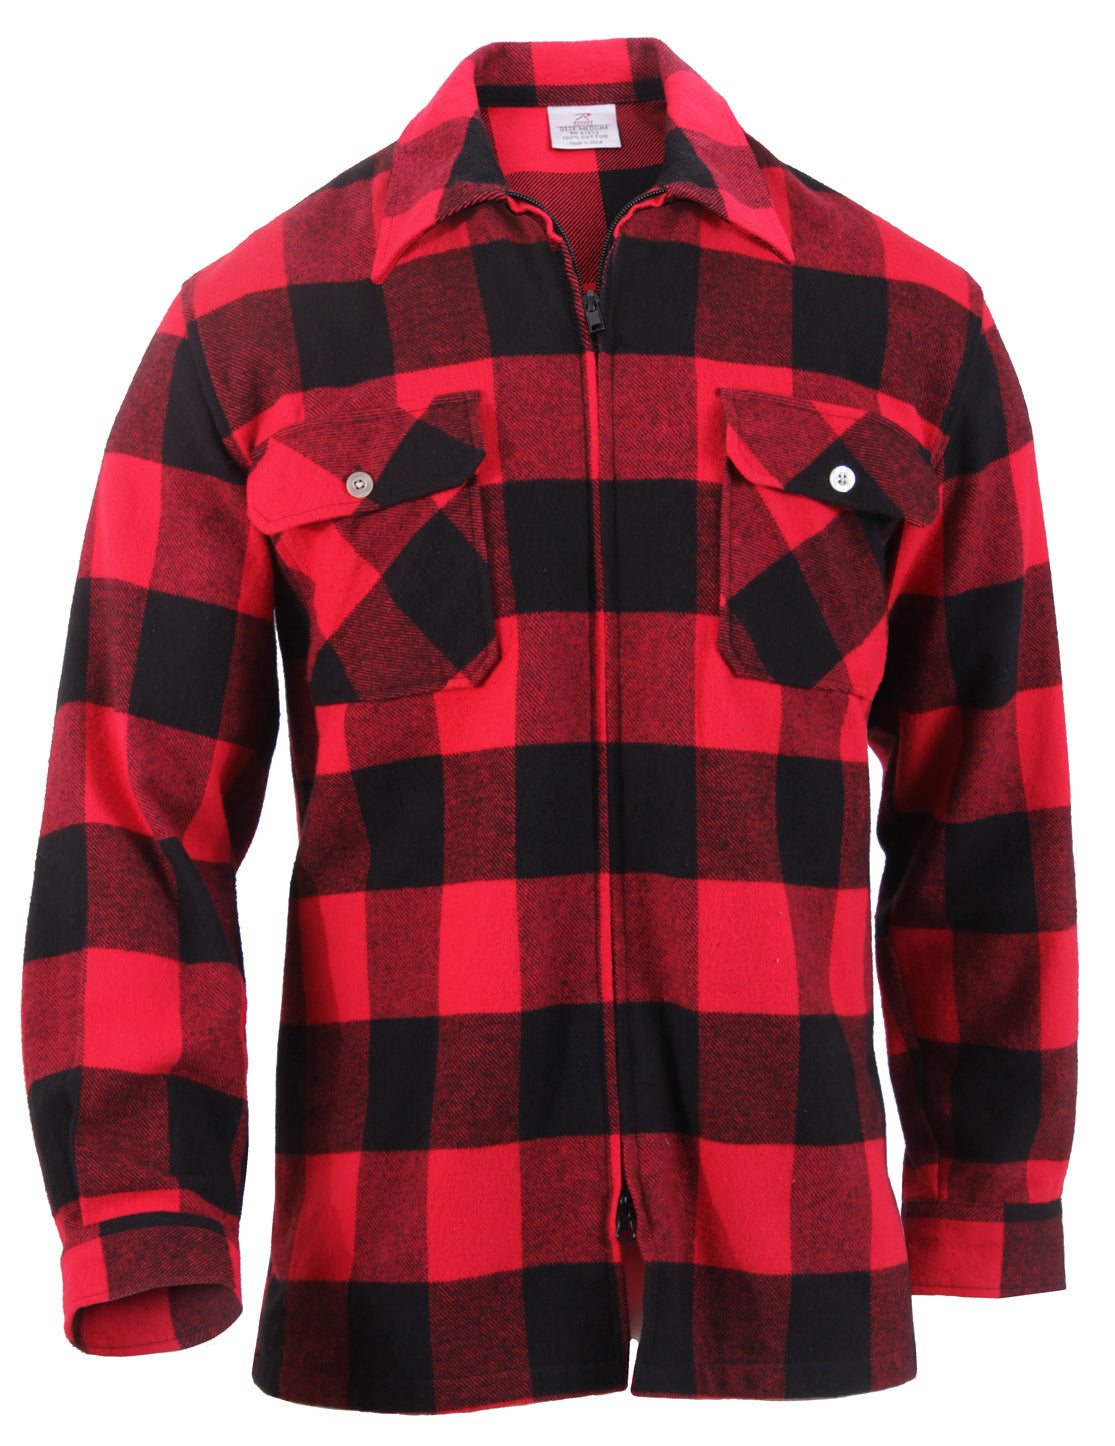 Milspec Concealed Carry Flannel Shirt Concealed Carry Clothing MilTac Tactical Military Outdoor Gear Australia